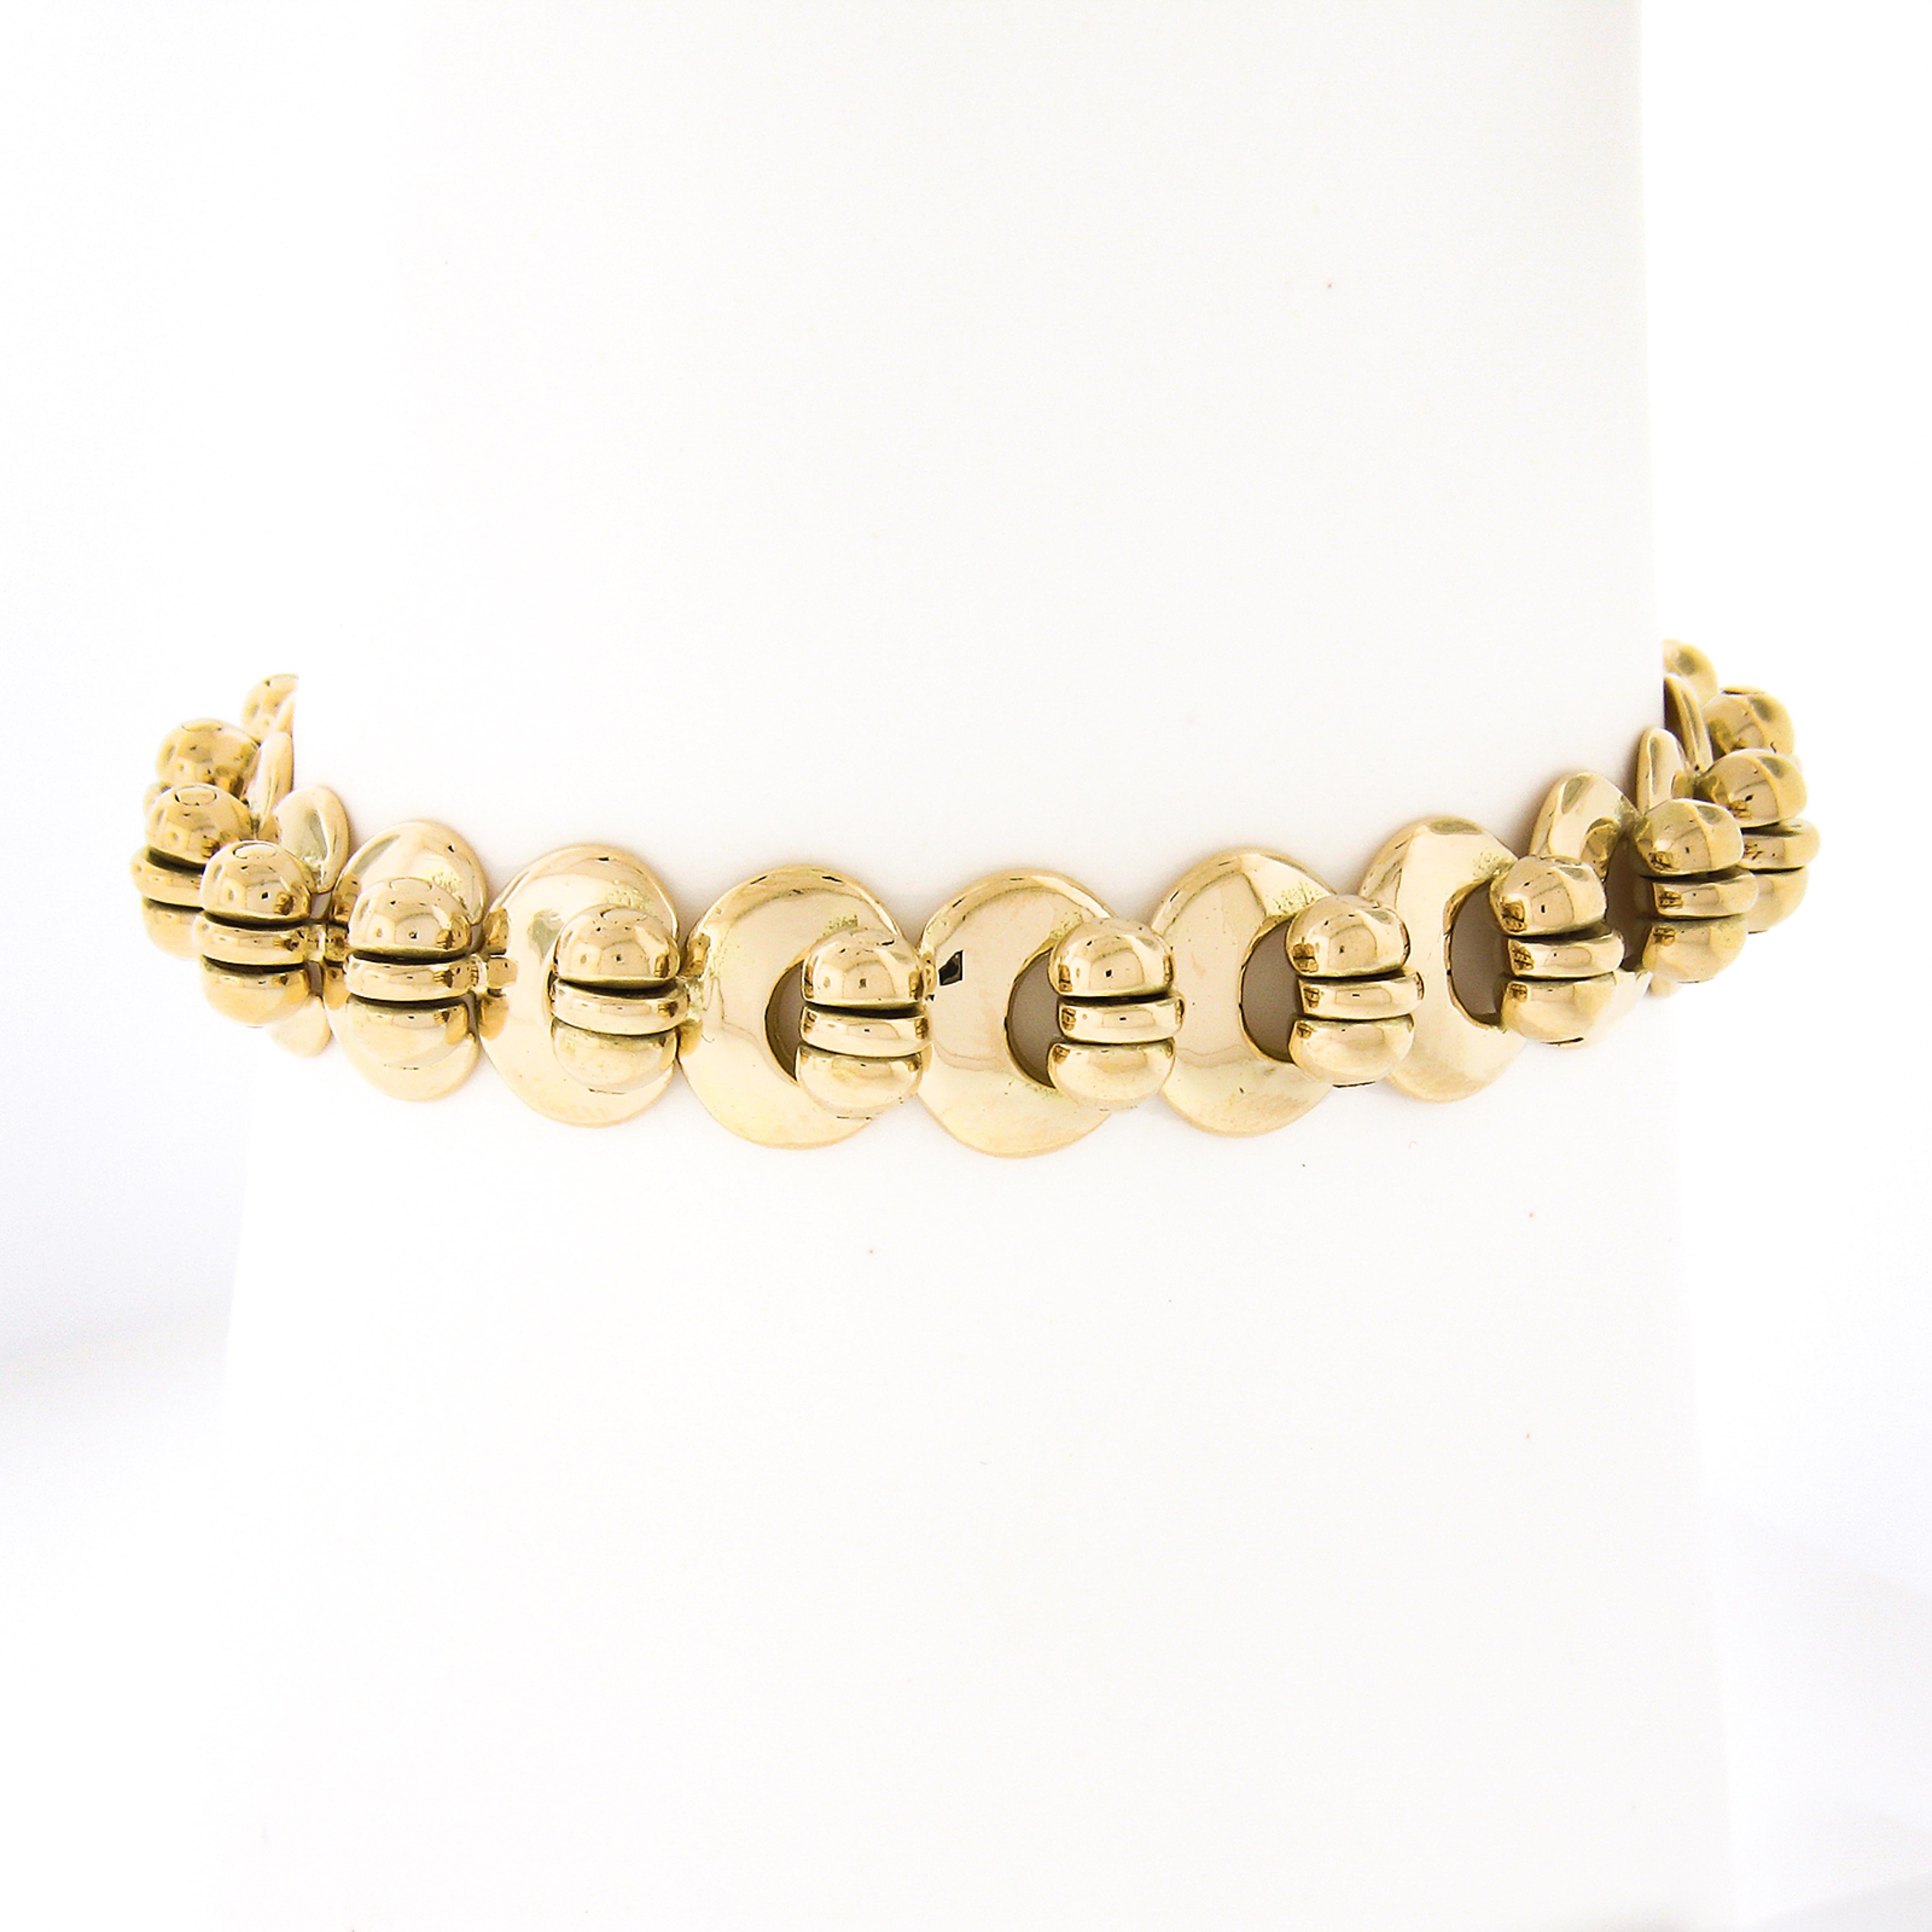 This fancy and very well made chain bracelet was crafted from solid 18k yellow gold. The beautiful handmade chain has a very unique design that is constructed from high-polished hinged links neatly set throughout and attaches with an oversized